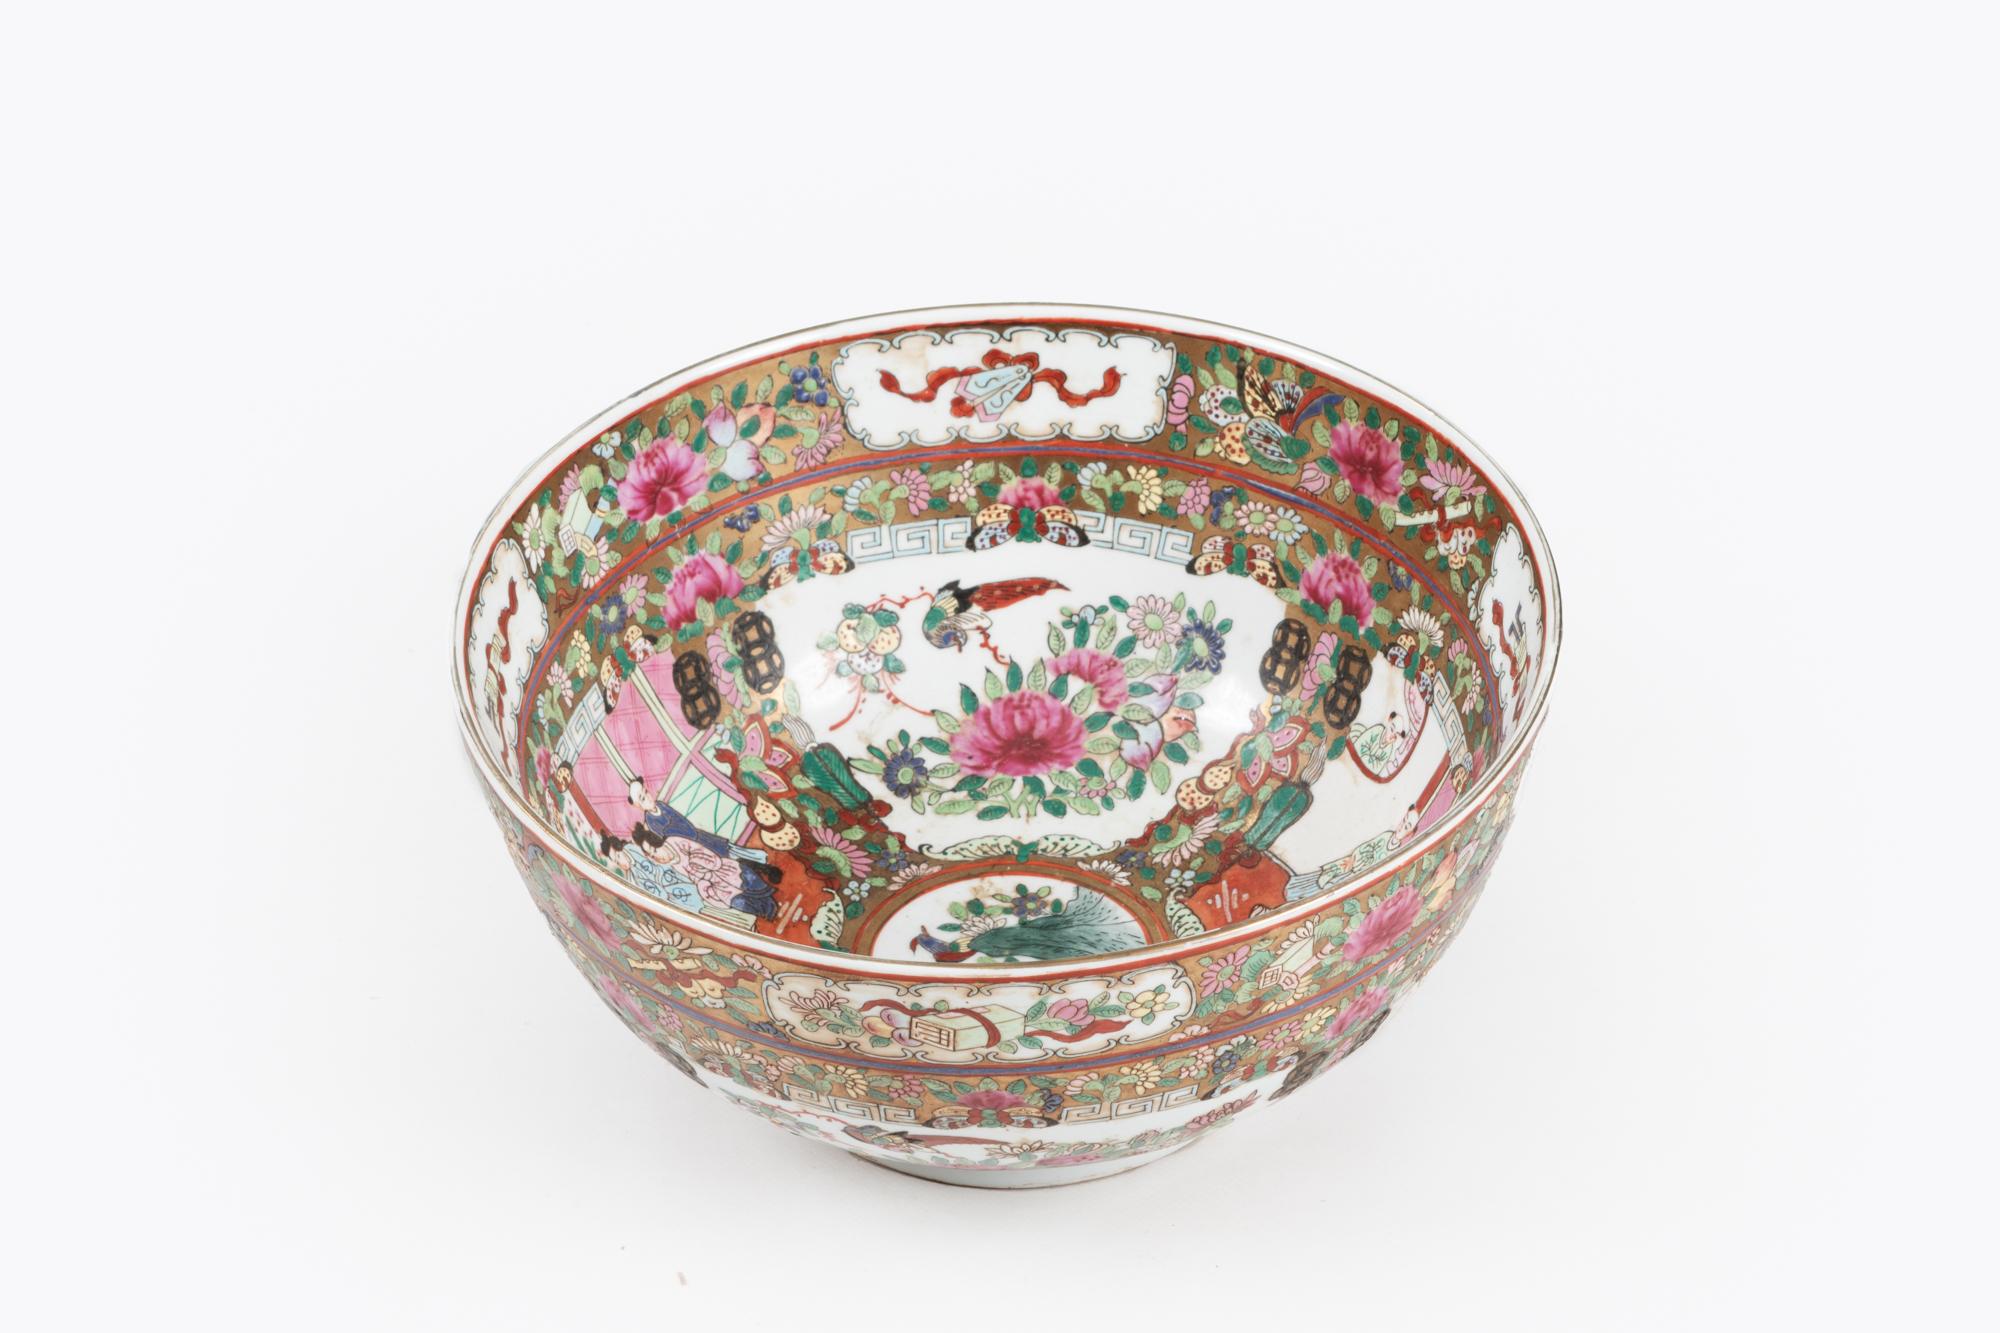 19th century Chinese famille rose porcelain bowl from the Qing Dynasty. Profusely decorated wish Chinese courtly scenes, flowers and birds.